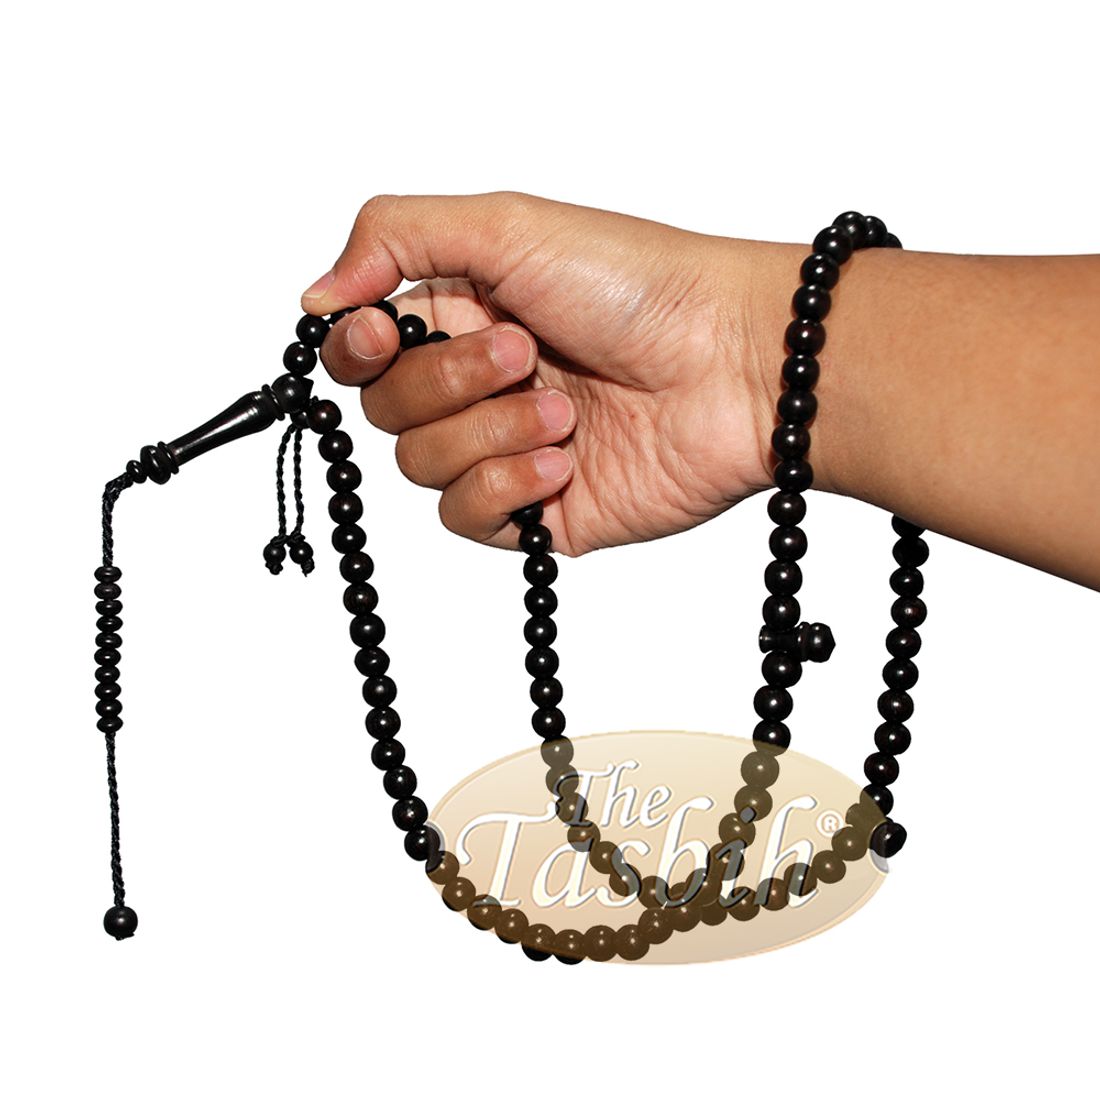 Prayer Beads Tasbih Necklace – Handcrafted Dyed Tamarind Wood 99-beads with Wood Stops